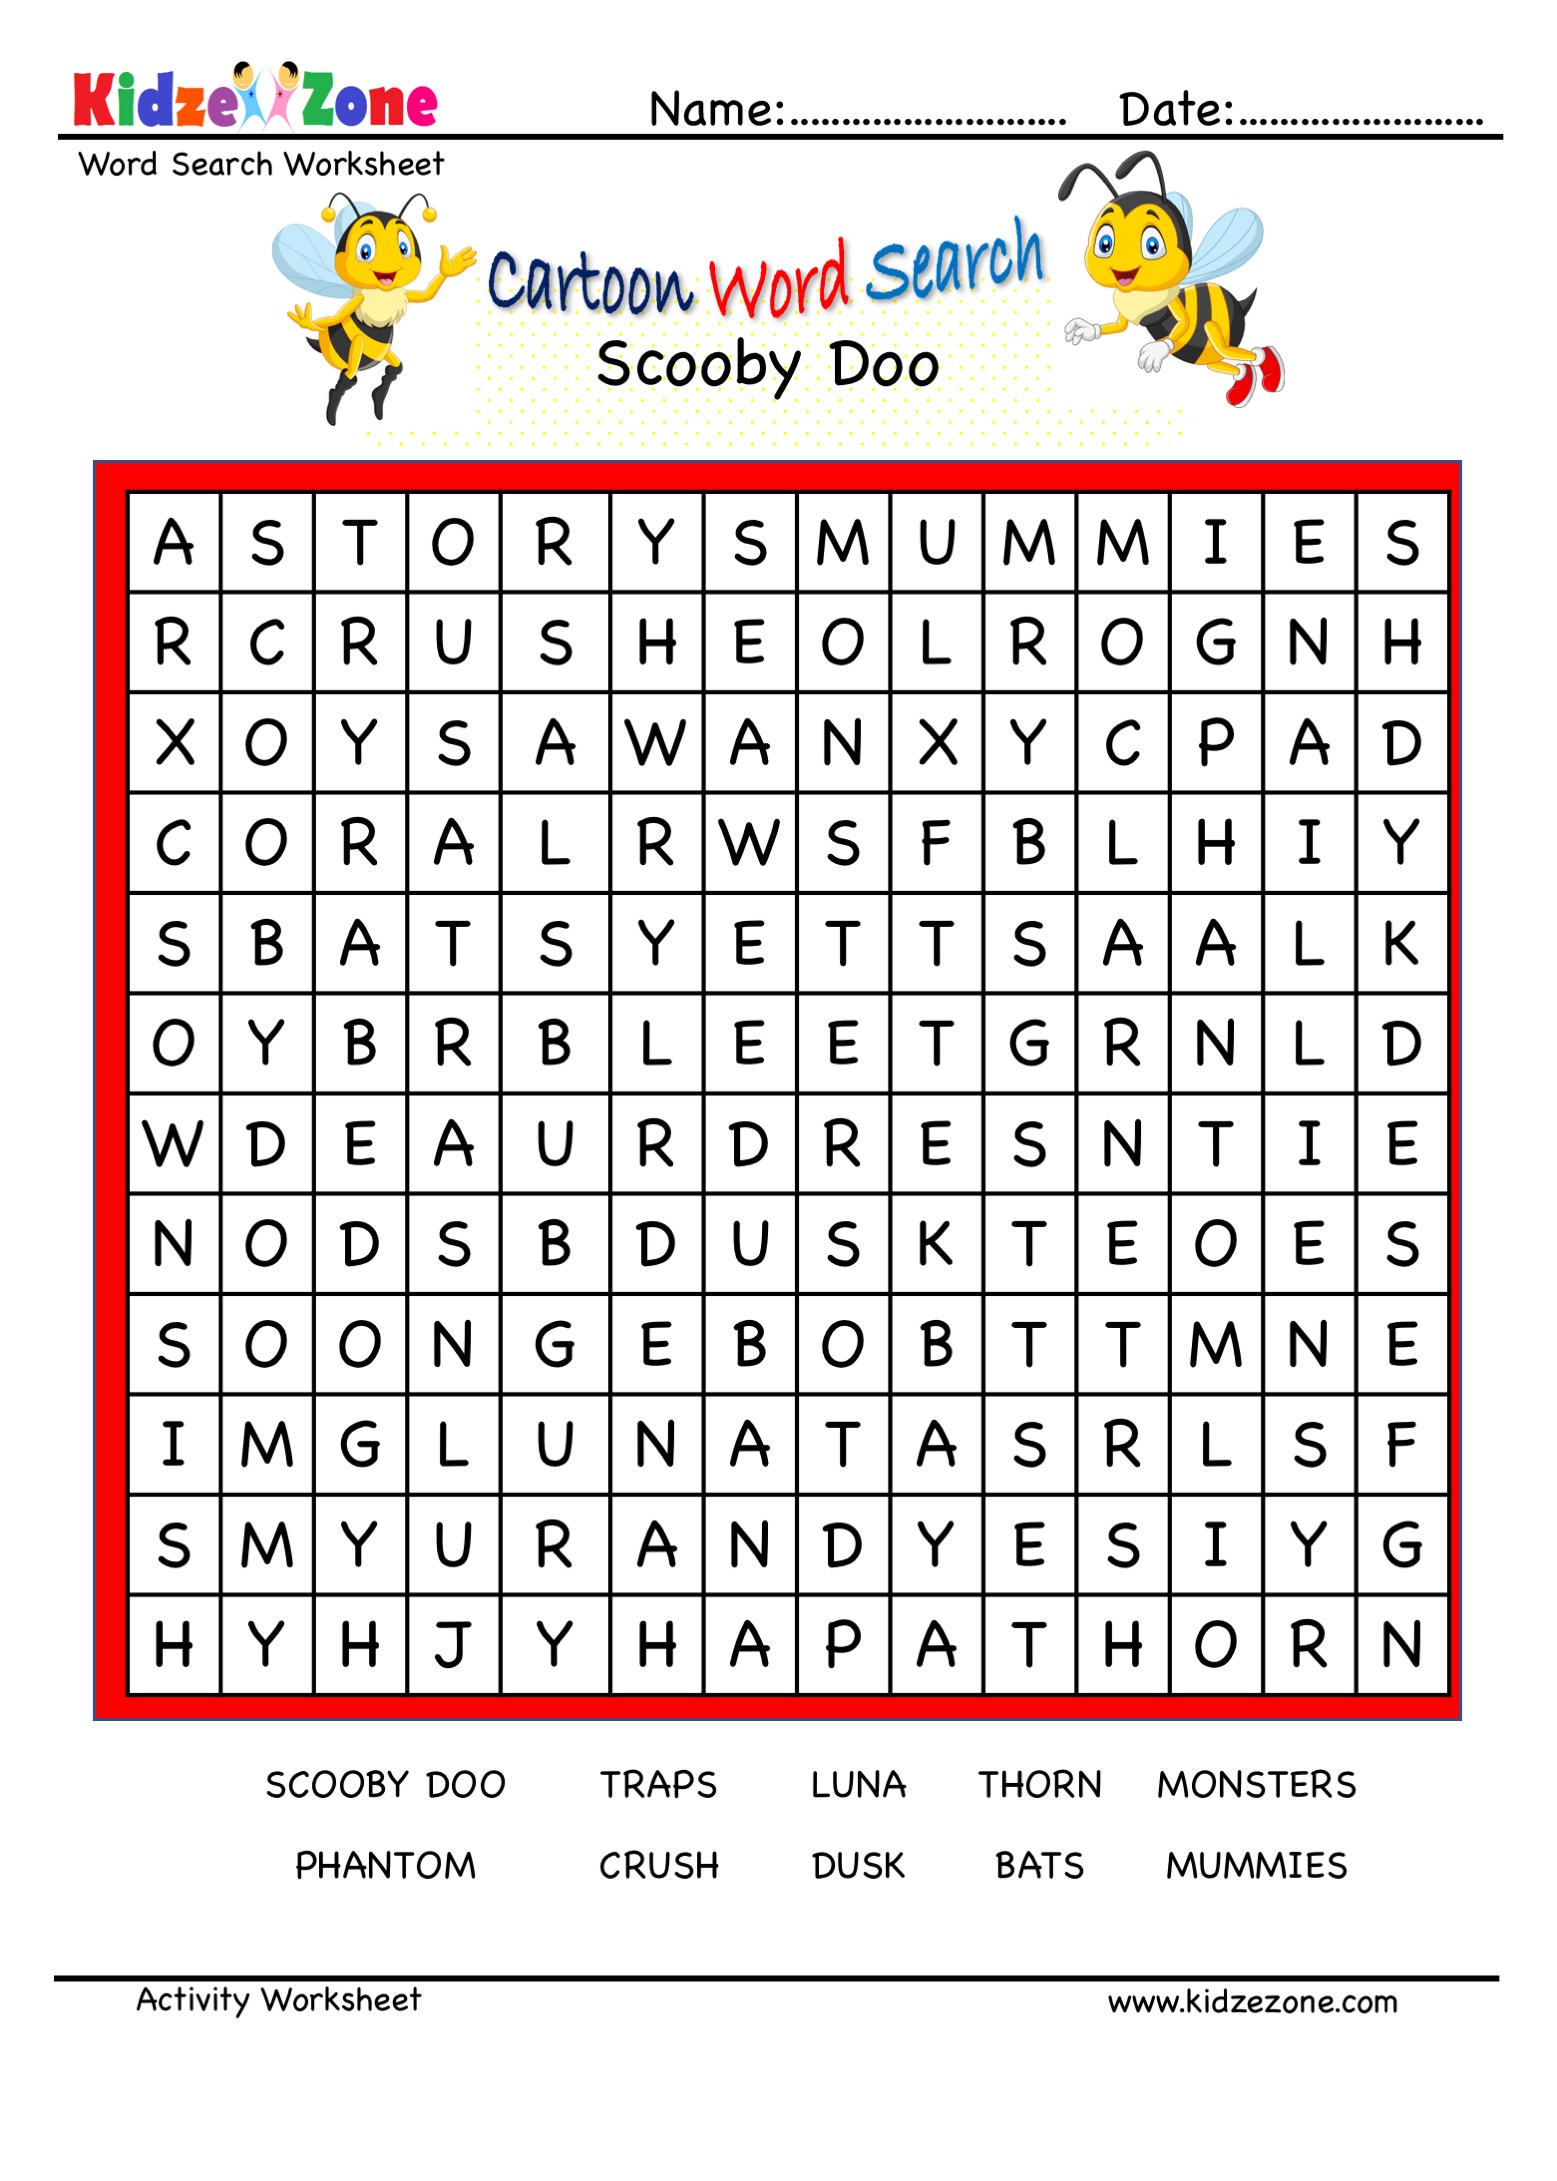 english-worksheets-scooby-doo